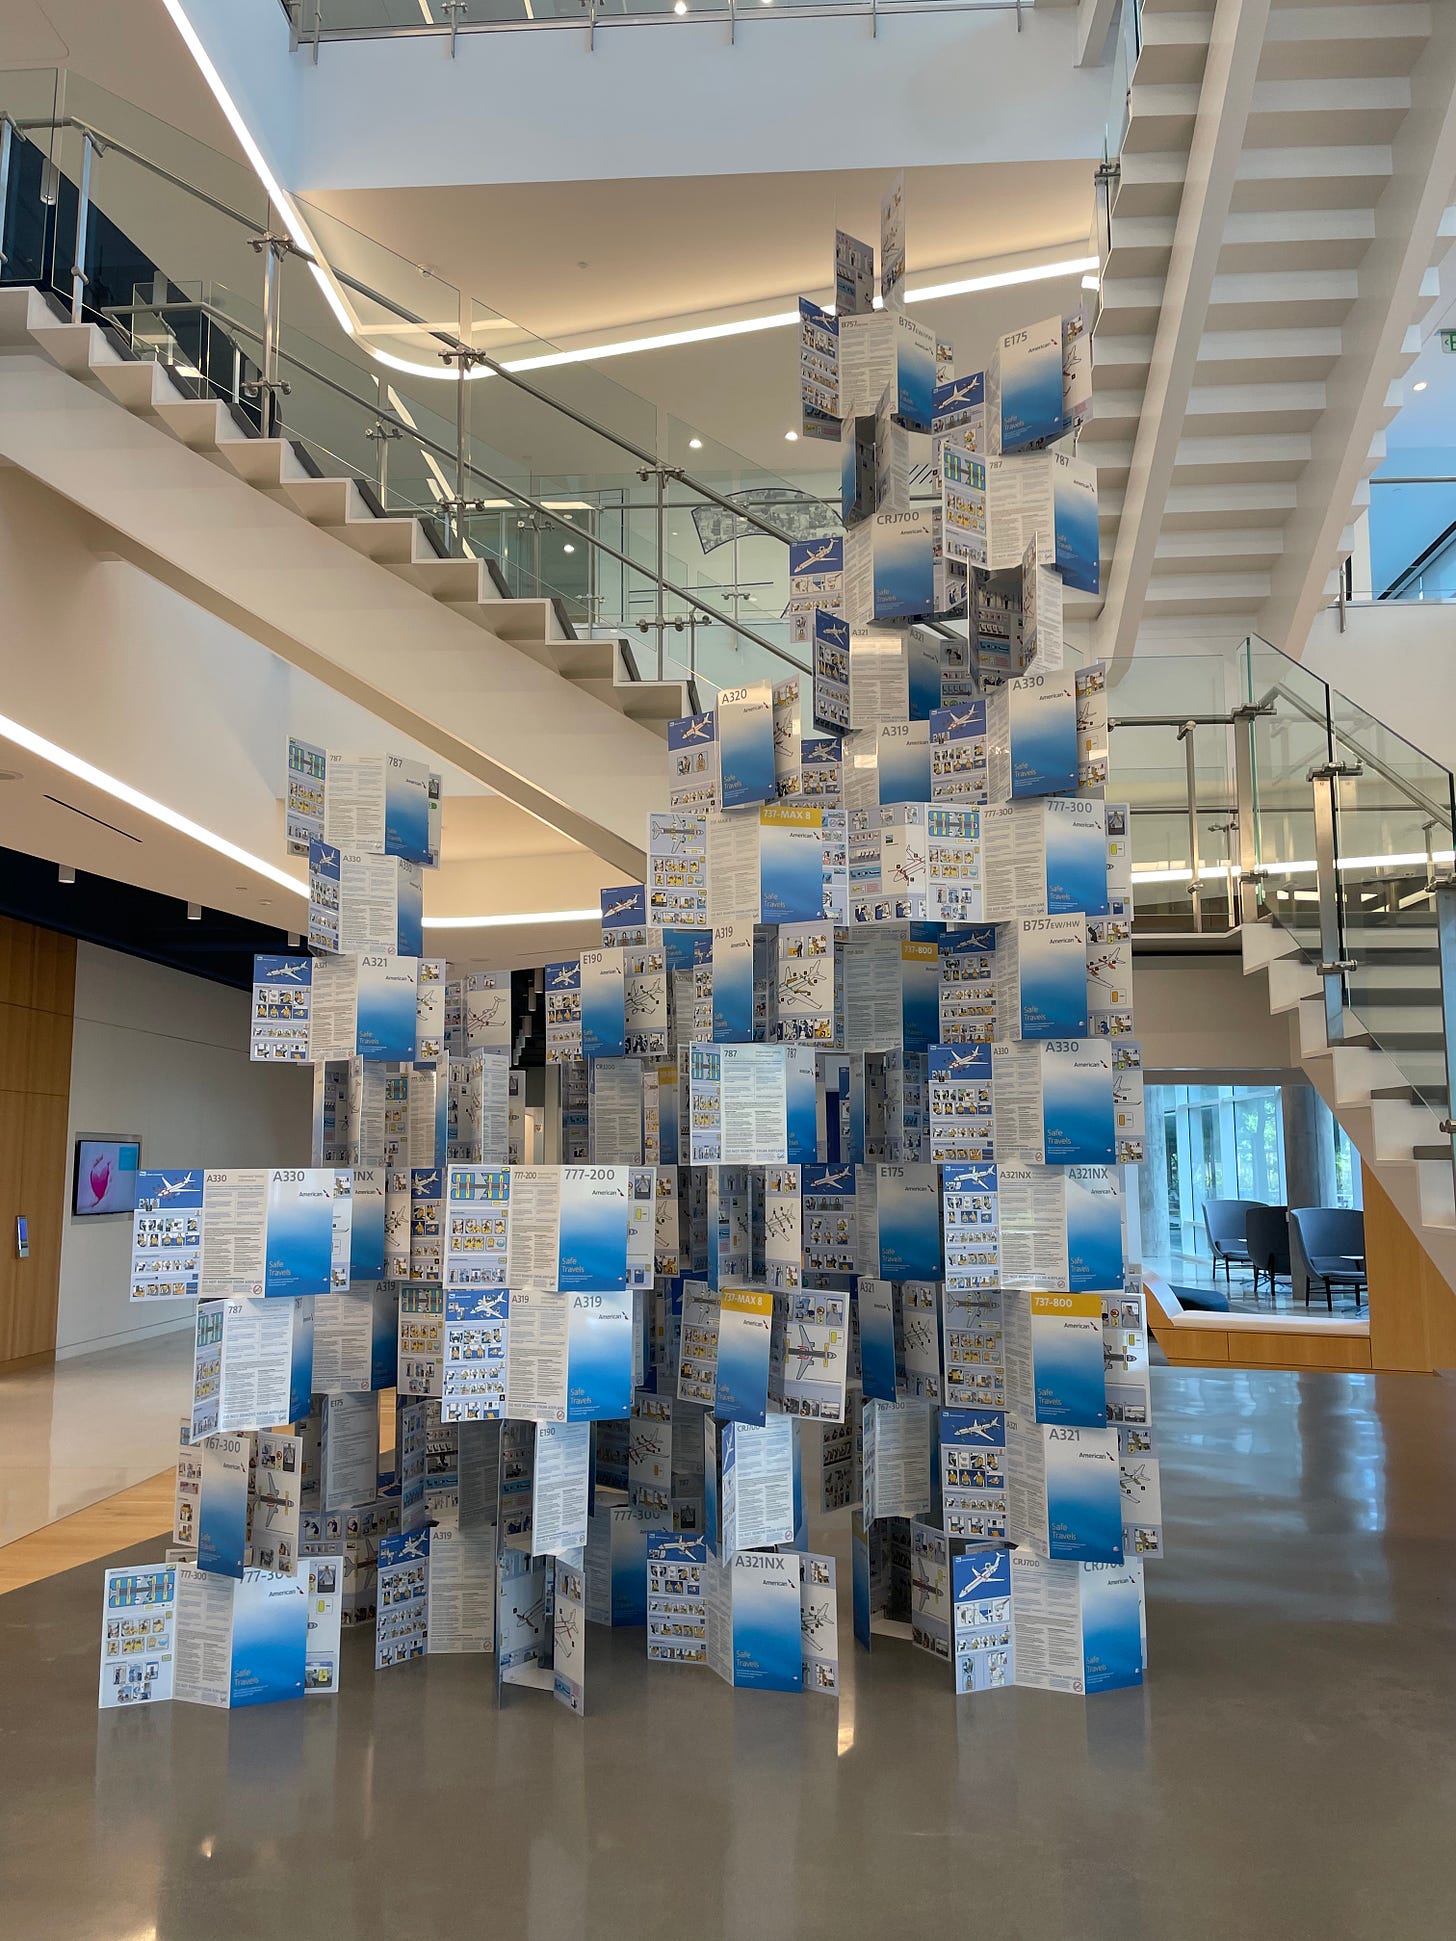 Sculpture made of airplane seat-back safety cards in the Skyview 8 building at the new American Airlines headquarters campus near DFW airport